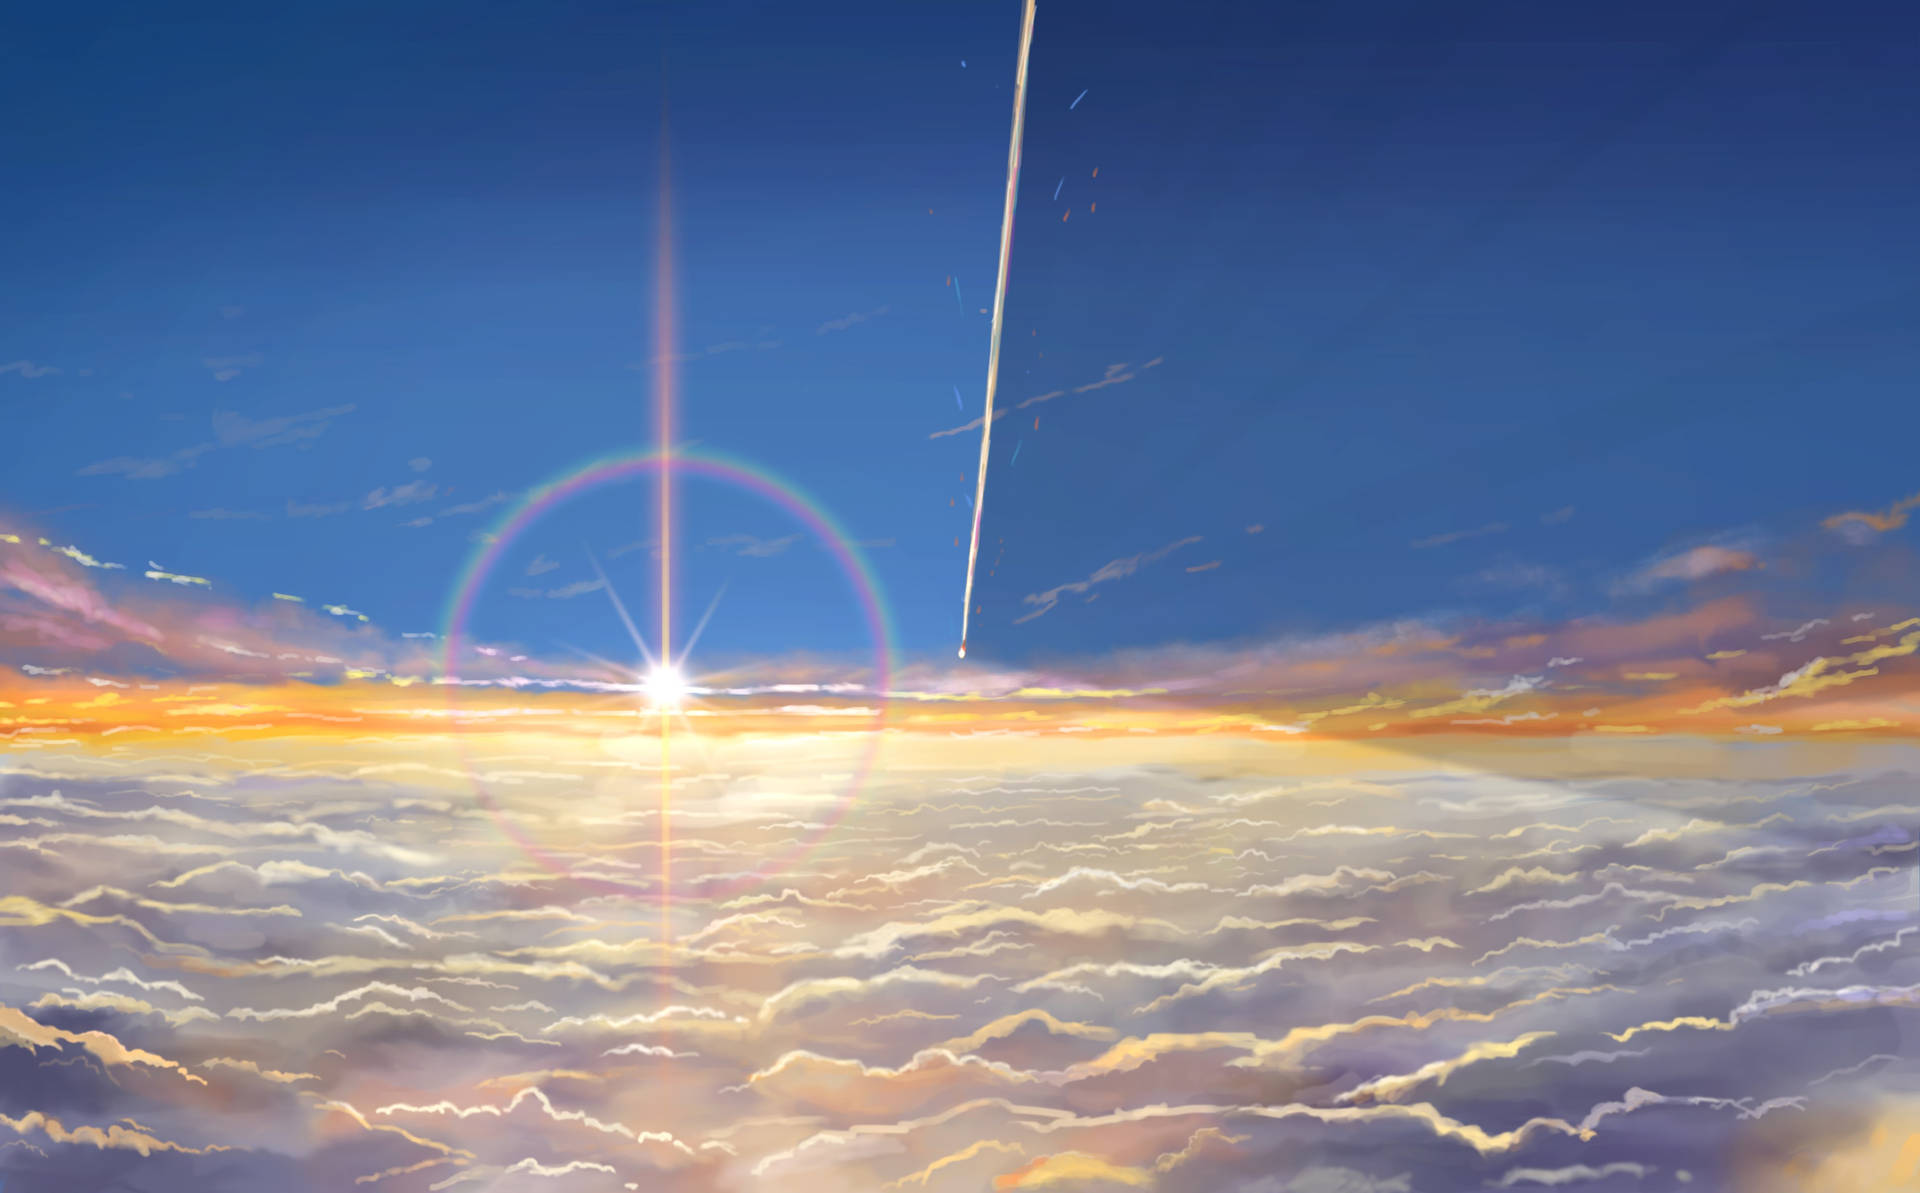 Free Your Name Anime Wallpaper Downloads, [200+] Your Name Anime Wallpapers  for FREE 